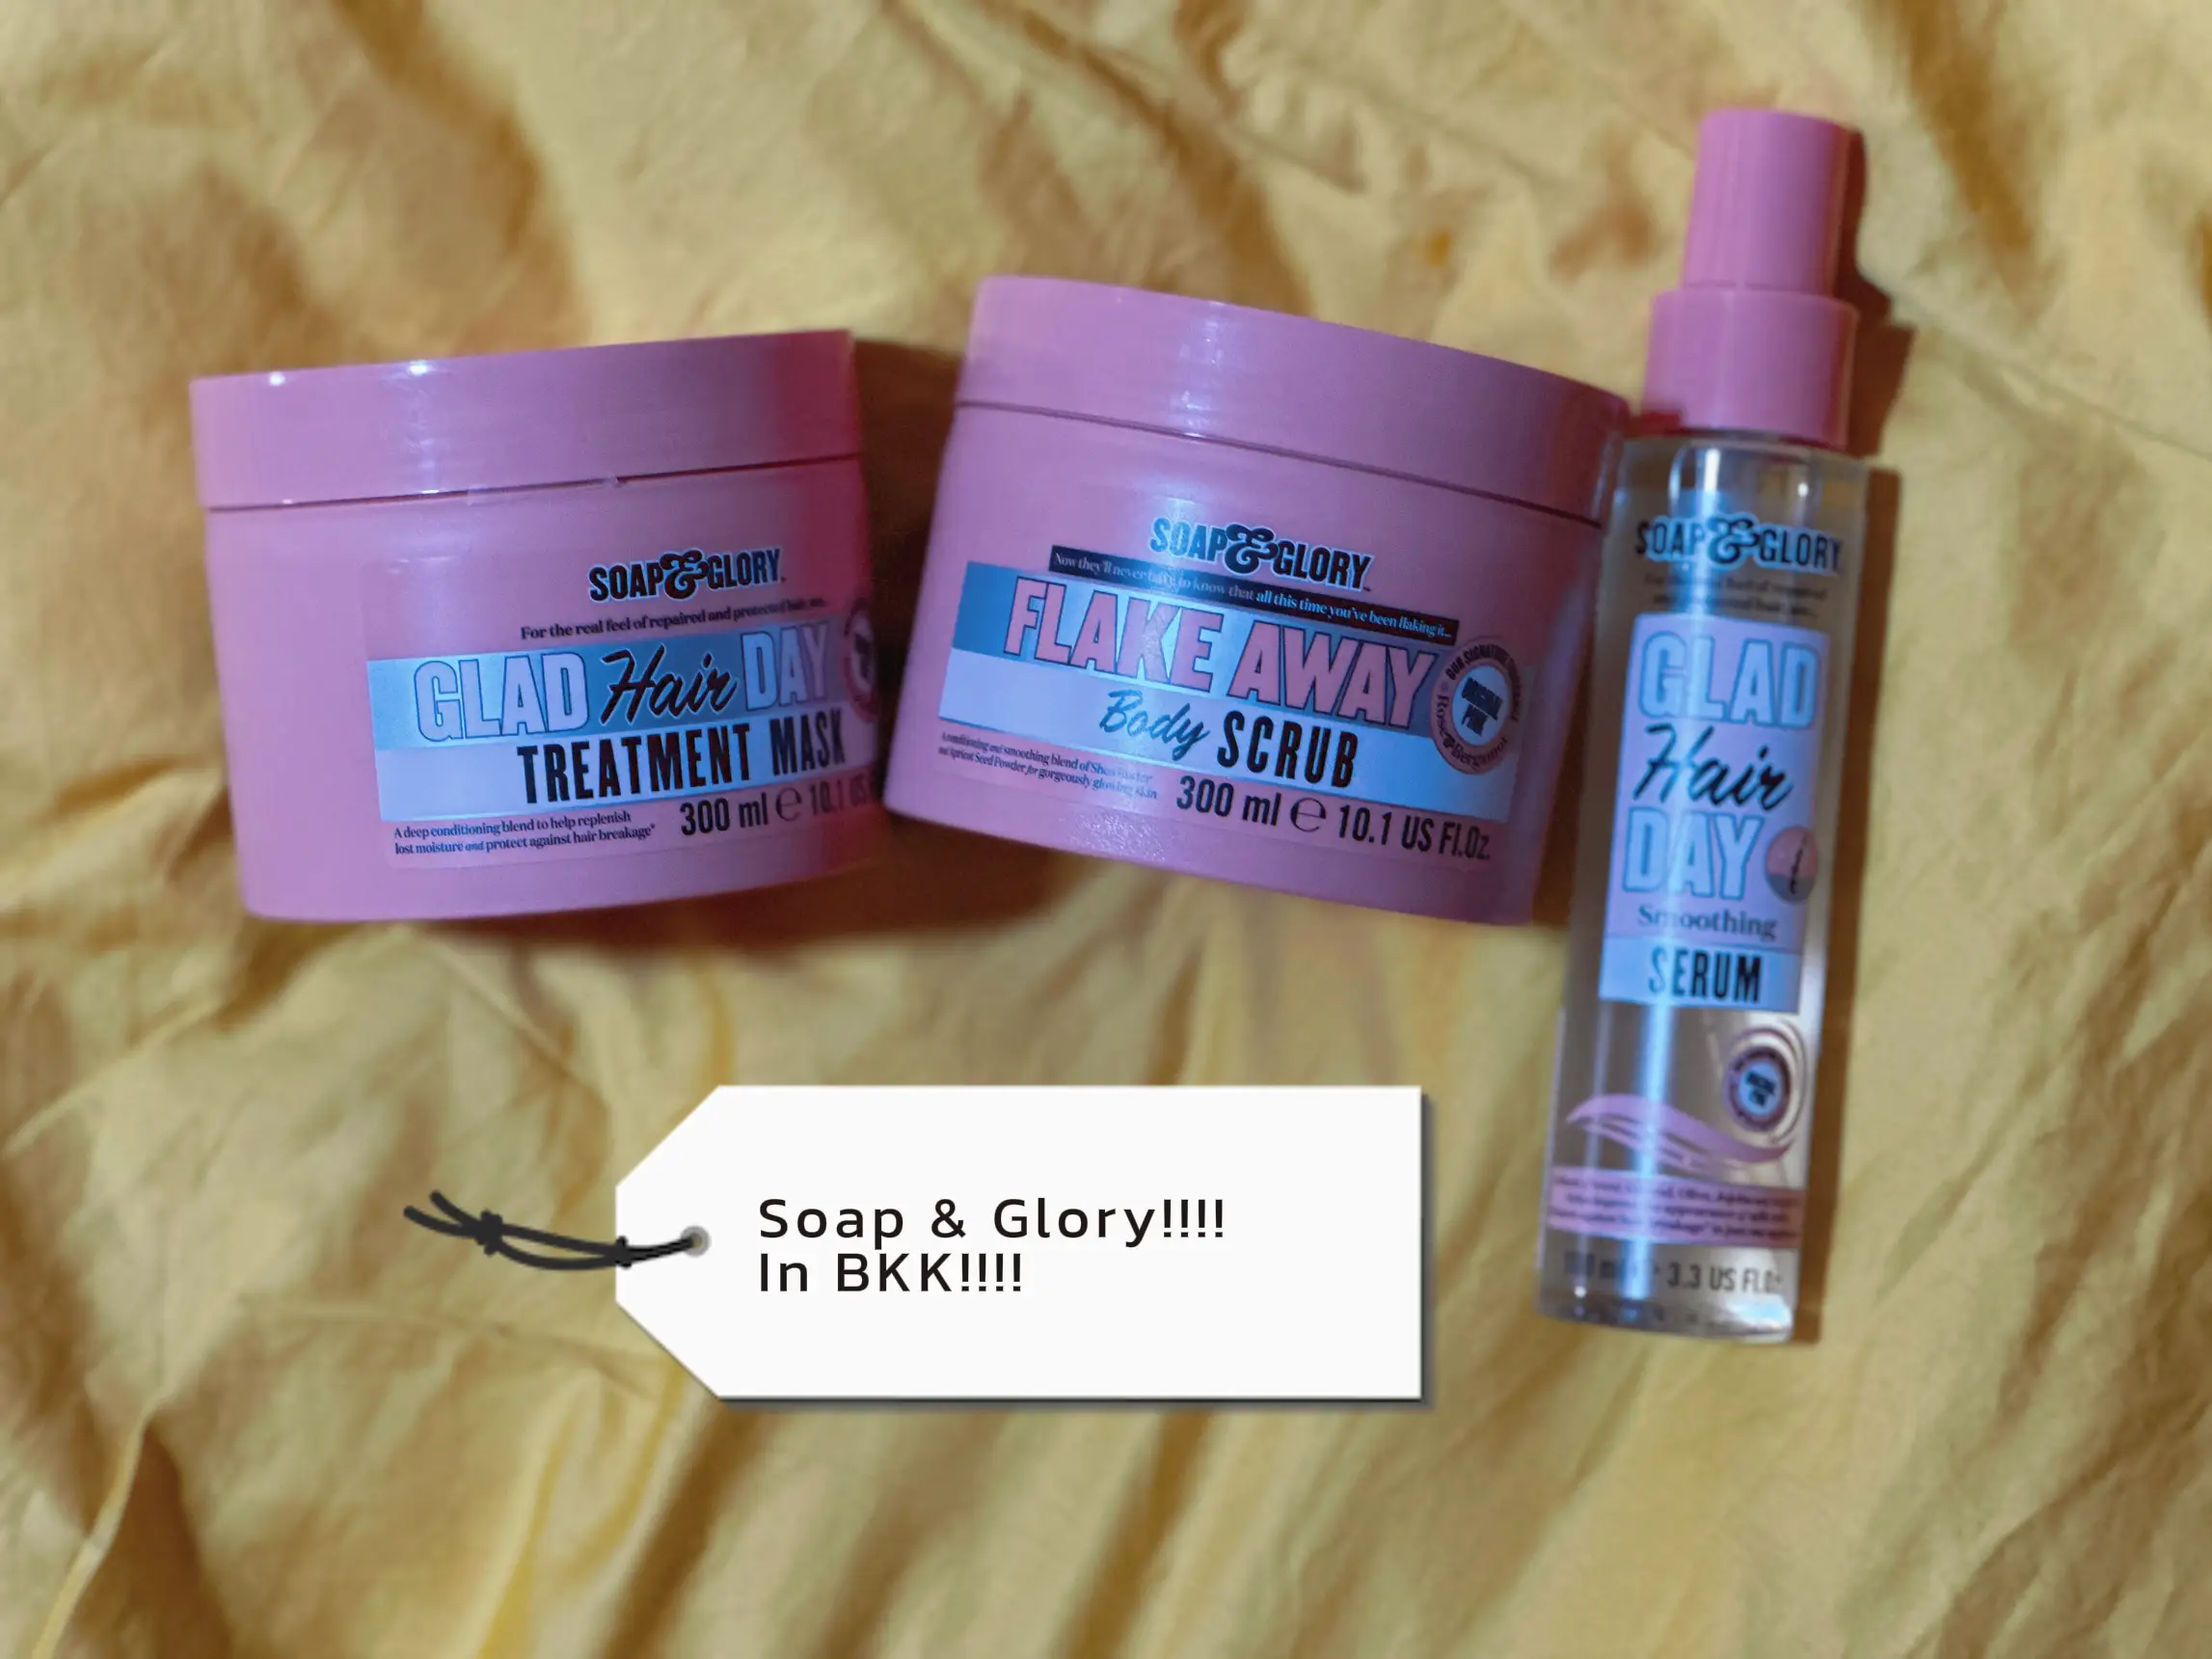 Soap & Glory!!!! In BKK!!!!?!?!??'s images